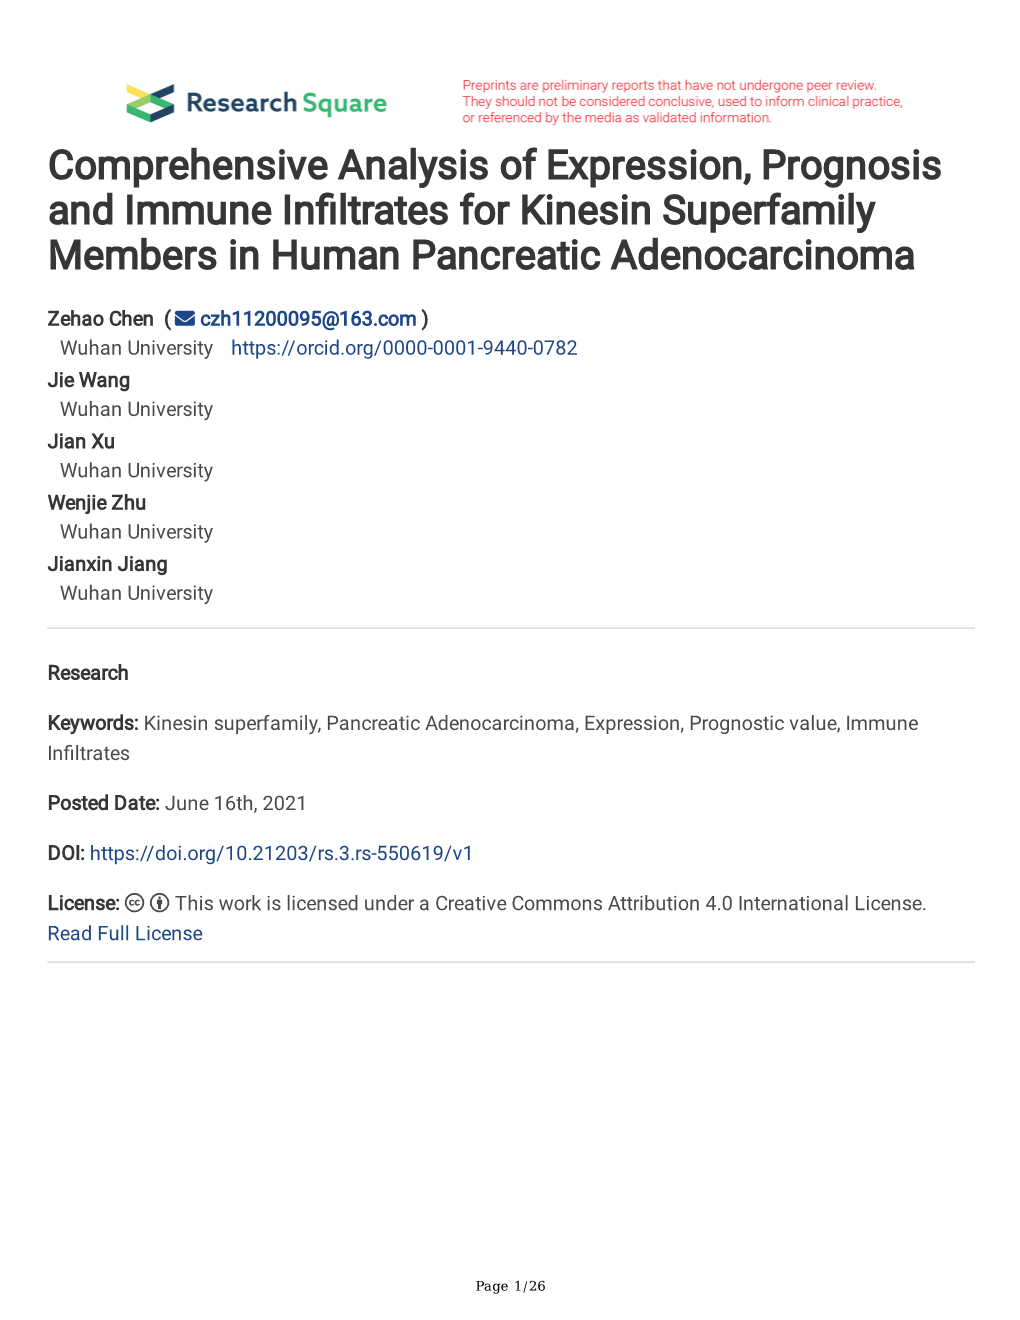 Comprehensive Analysis of Expression, Prognosis and Immune Infltrates for Kinesin Superfamily Members in Human Pancreatic Adenocarcinoma